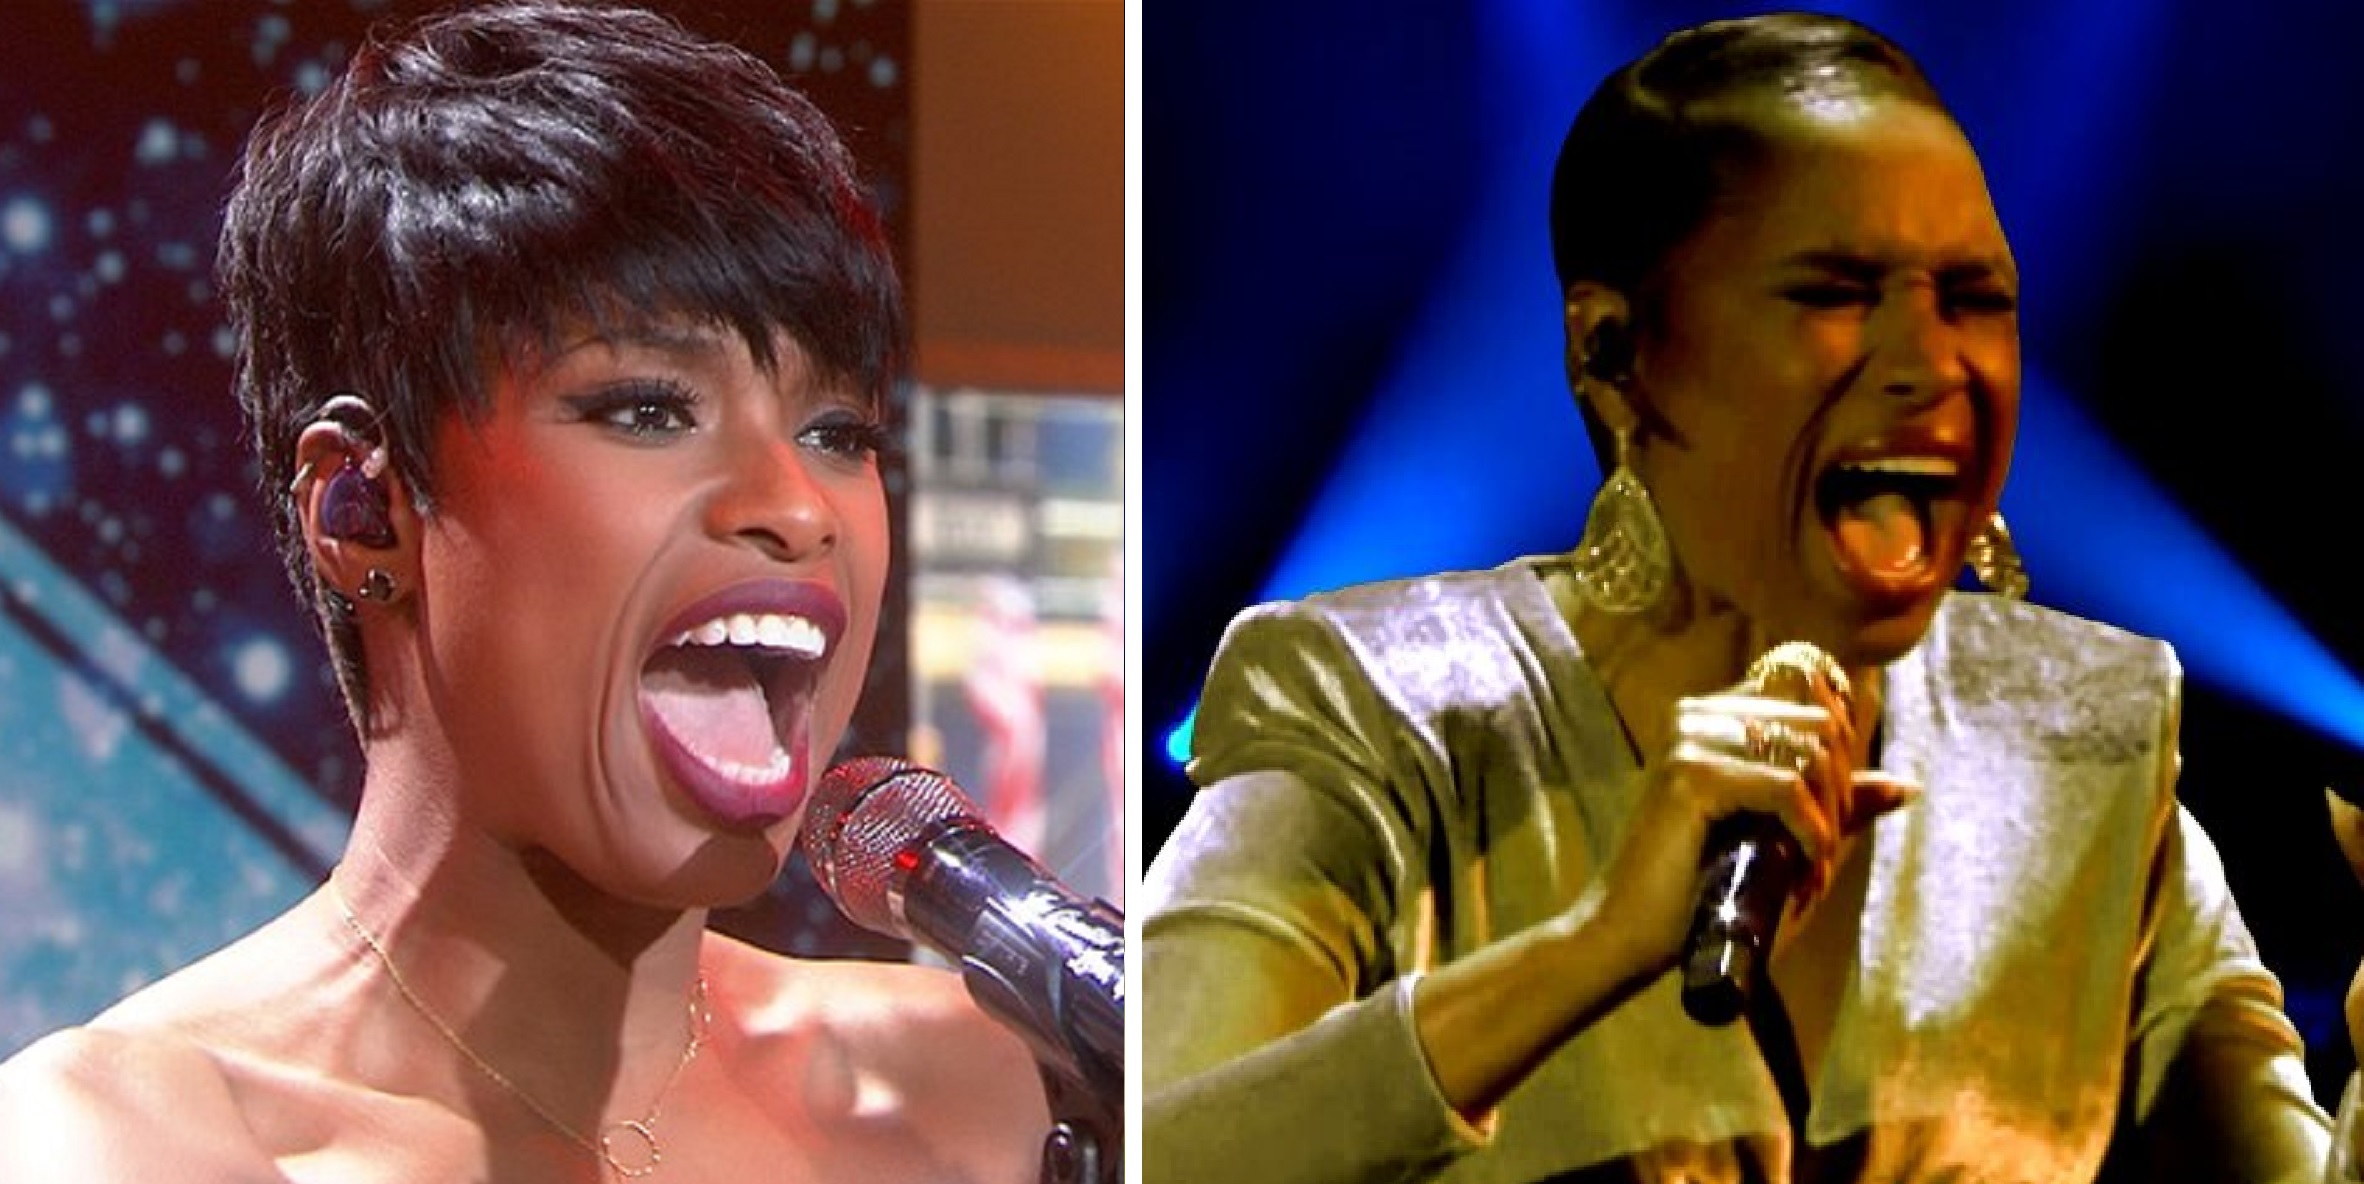 10 Best Live Performances Of Jennifer Hudson That Show How Underrated She Is